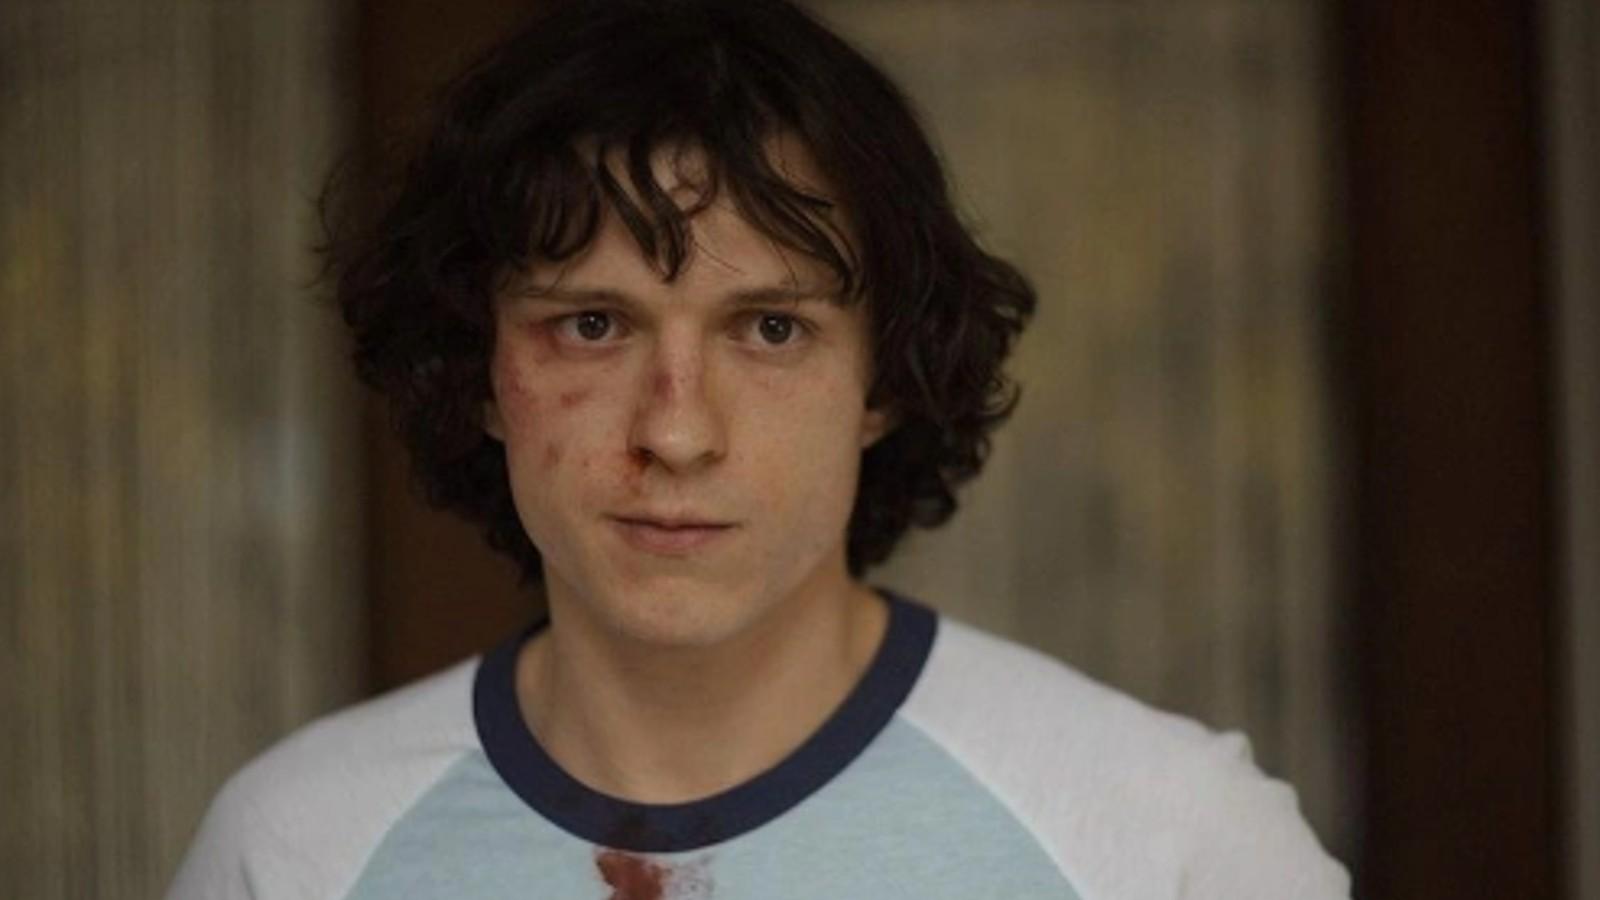 A close up of Tom Holland with a busted eye in The Crowded Room